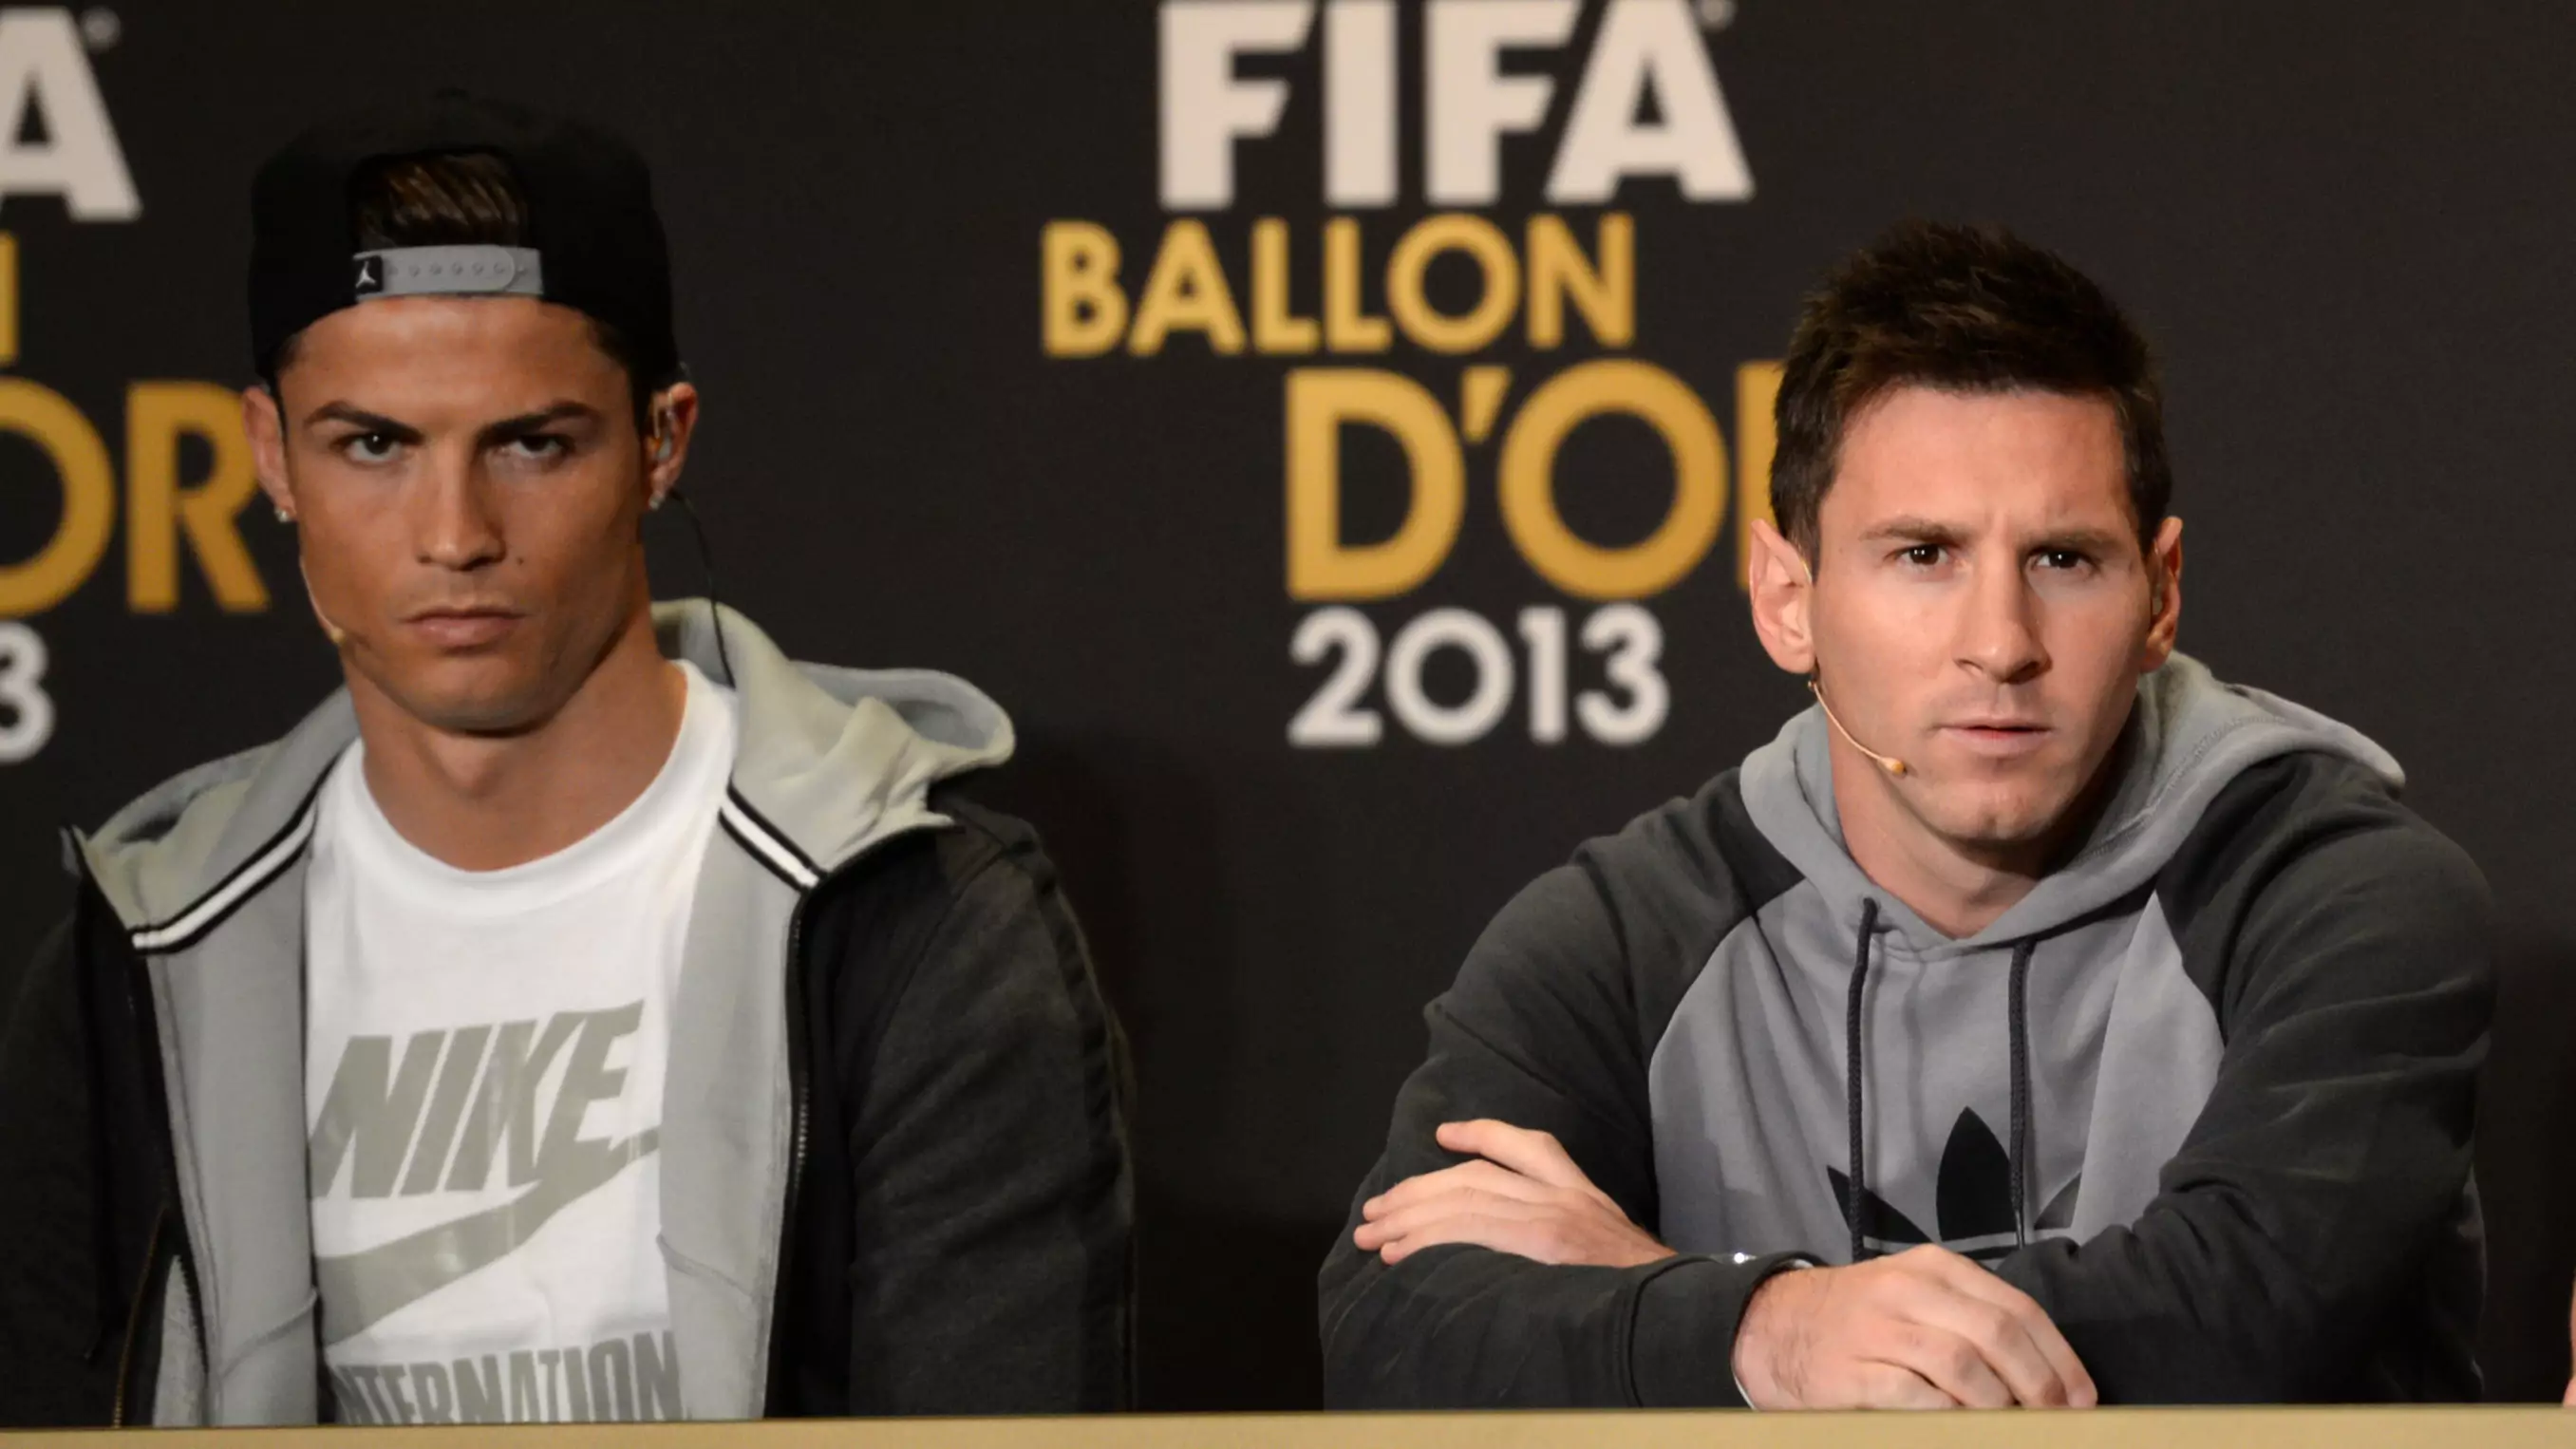 Cristiano Ronaldo Set To Miss Showdown With Lionel Messi After Positive COVID-19 Test